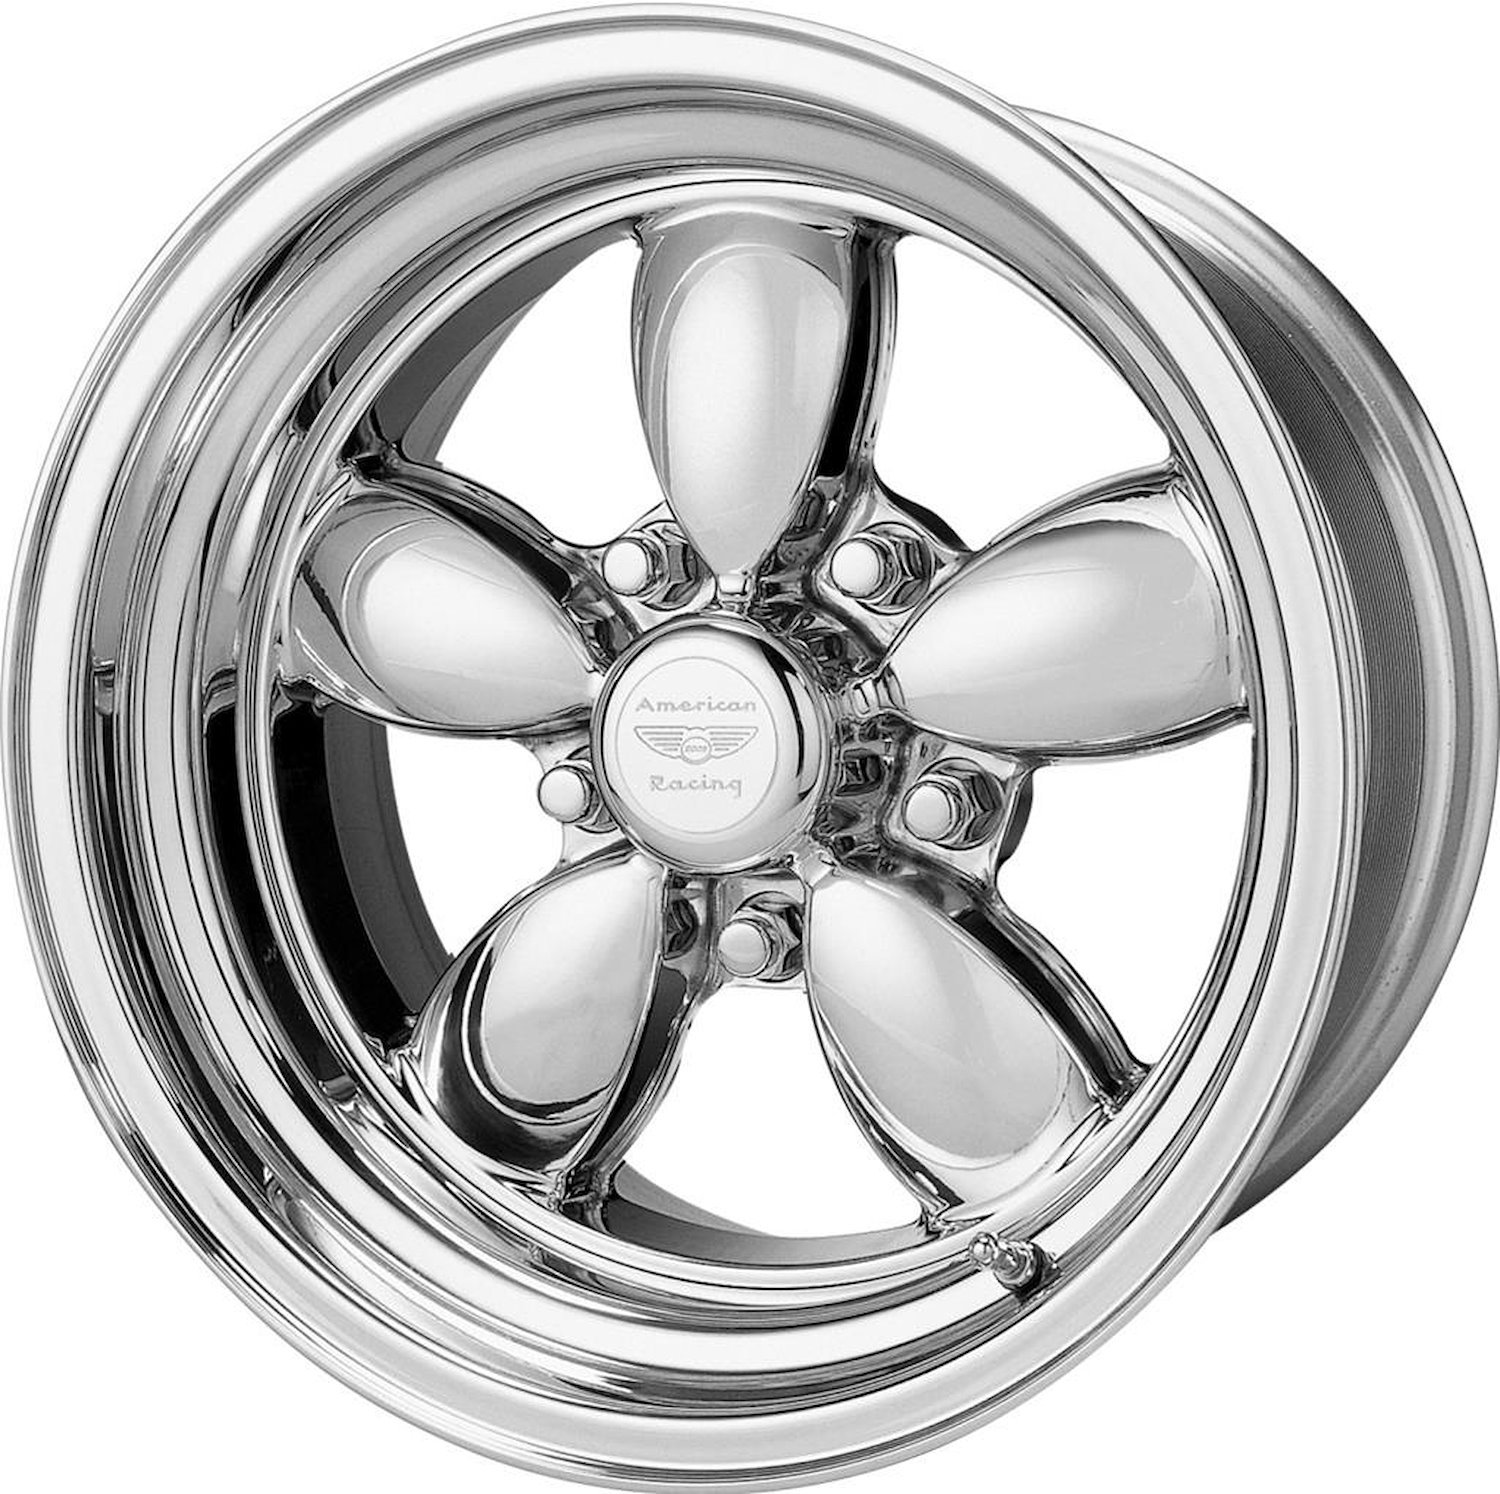 AMERICAN RACING CLASSIC 200S TWO-PIECE POLISHED 17 x